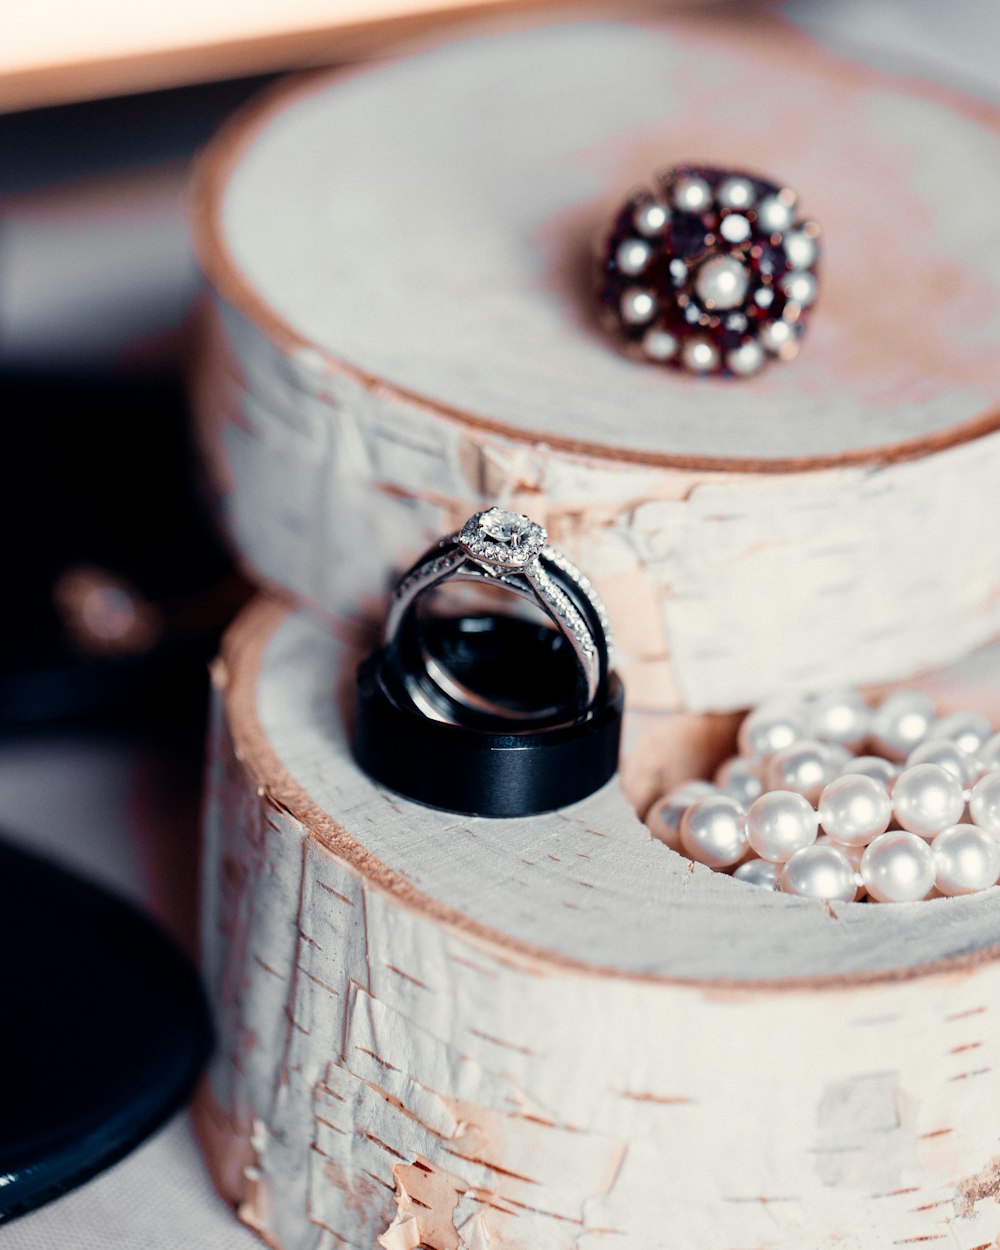 silver and black round accessory on brown wooden table